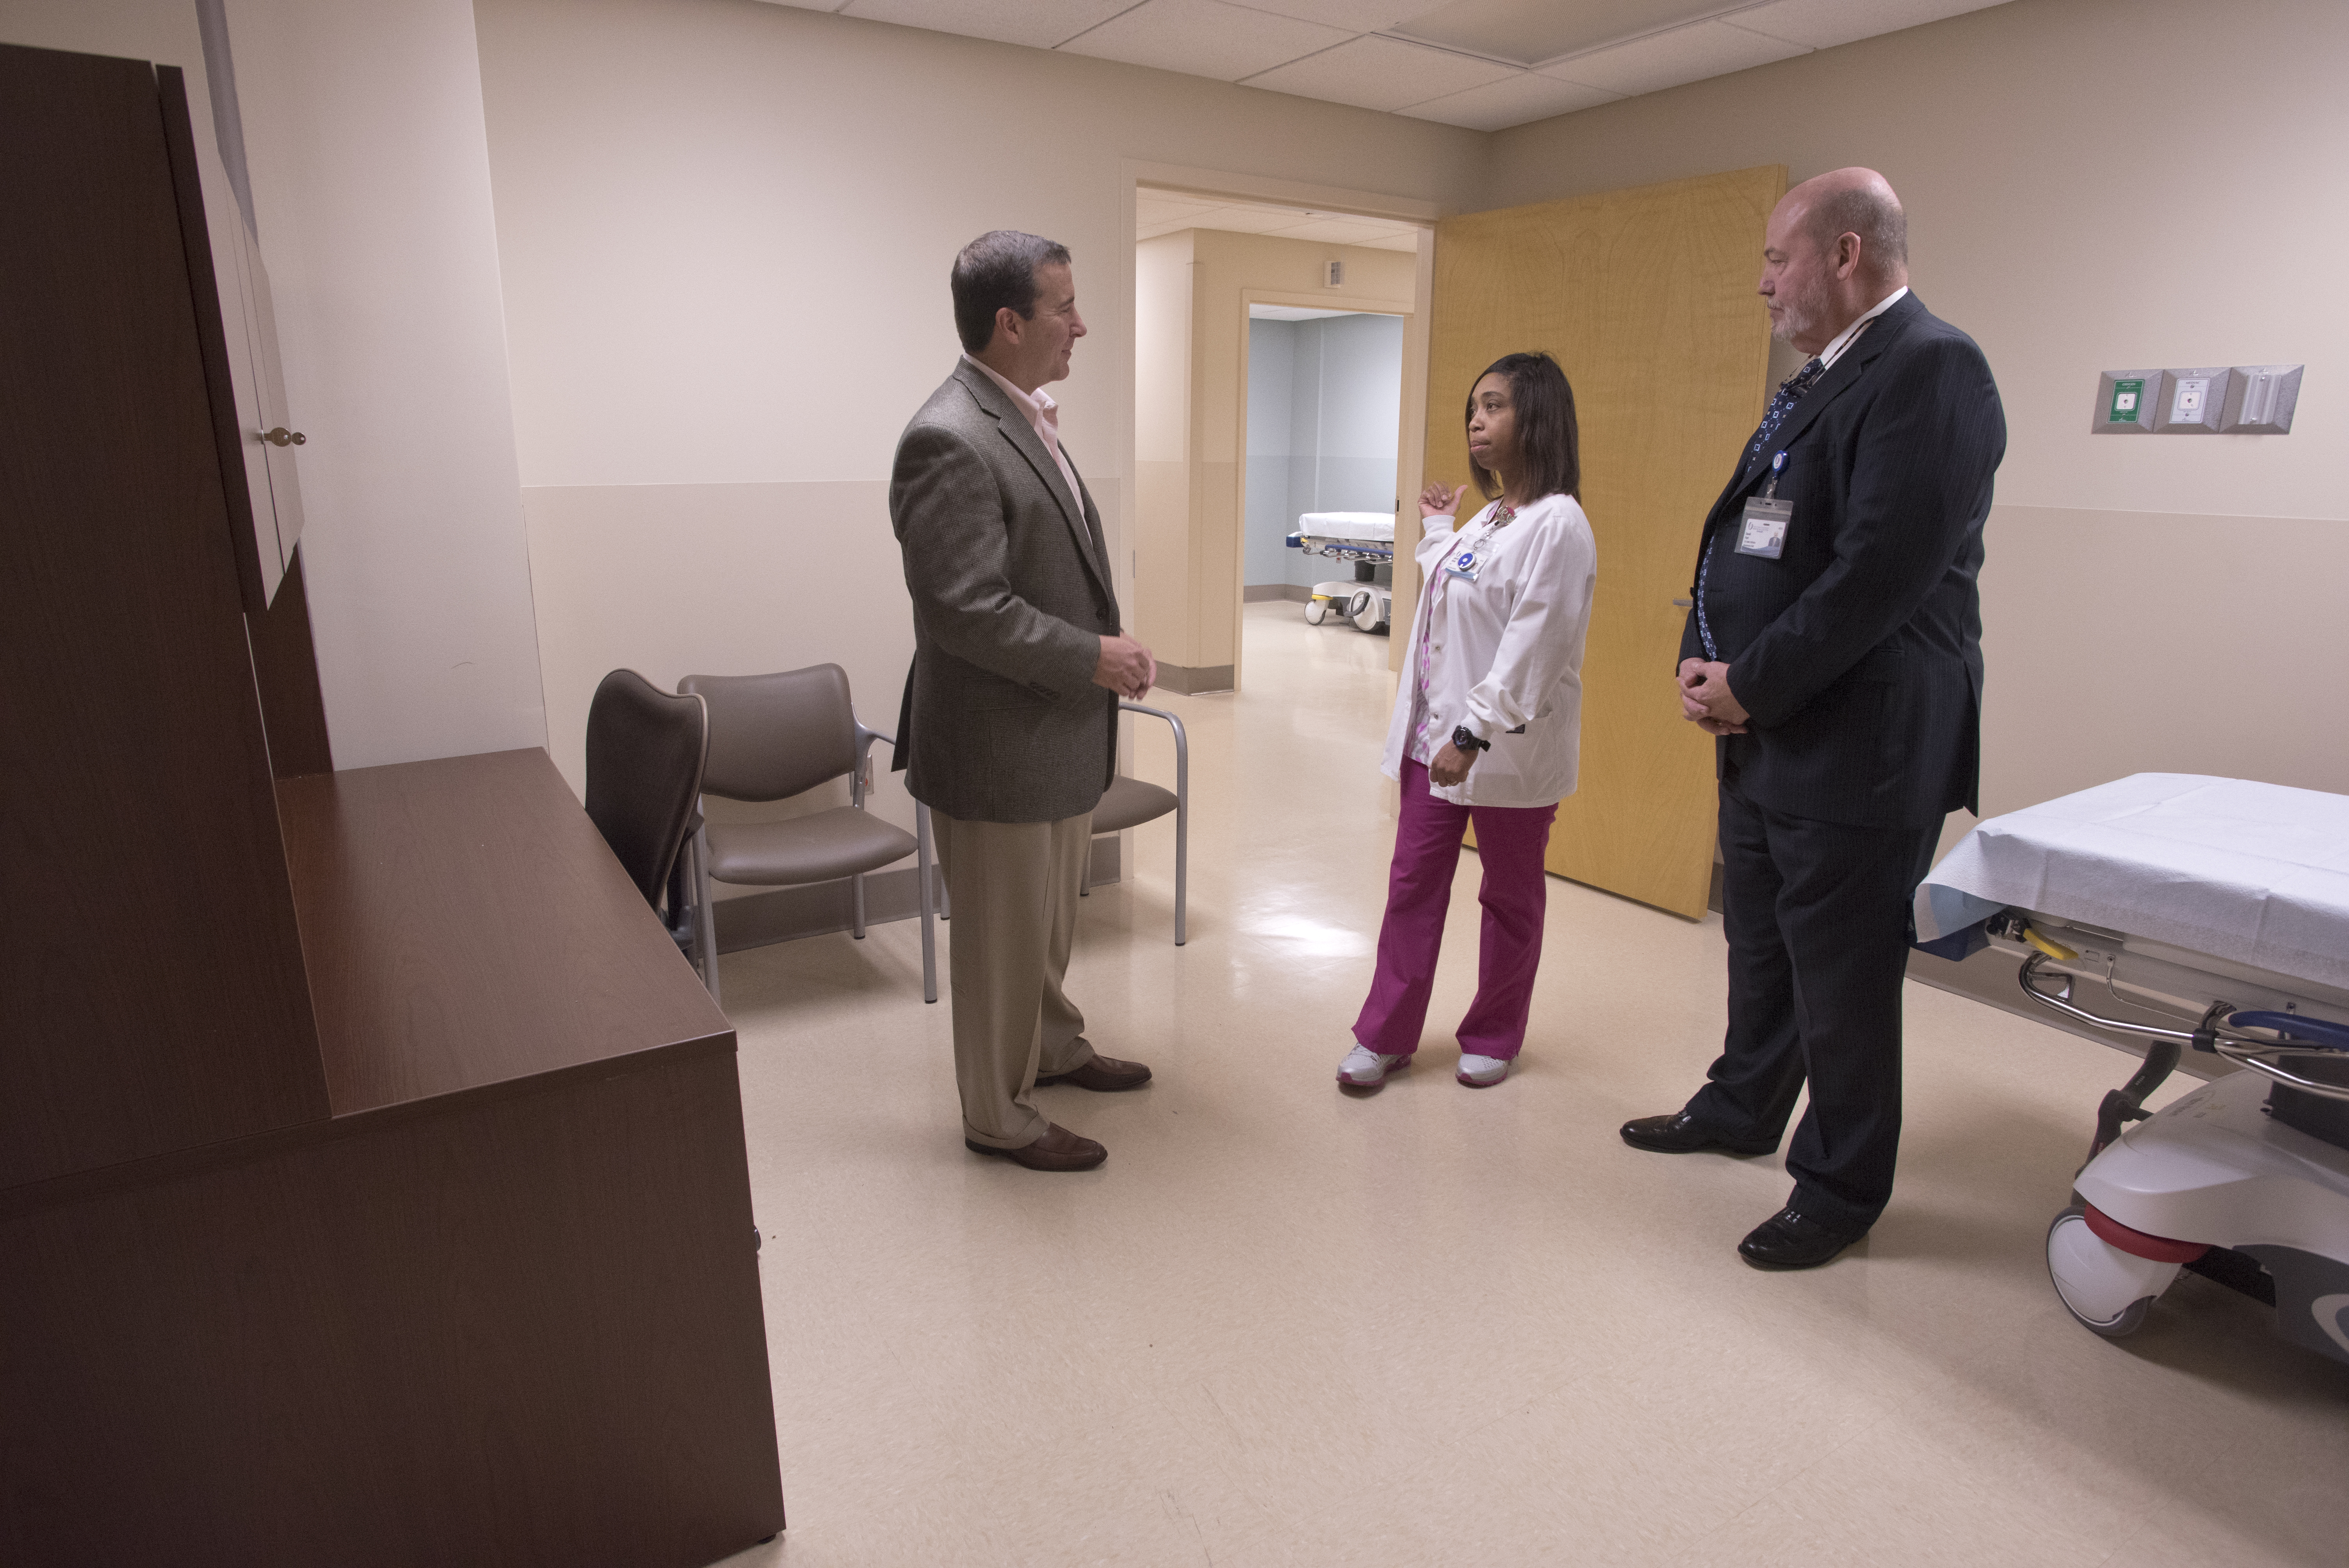 Kevin Cook (left), CEO of University Hospitals and Health System, and David Putt, CEO of UMMC Holmes County and UMMC Grenada, get a tour of the Lexington hospital's new Emergency Department triage room from registered nurse Lakessha Head.